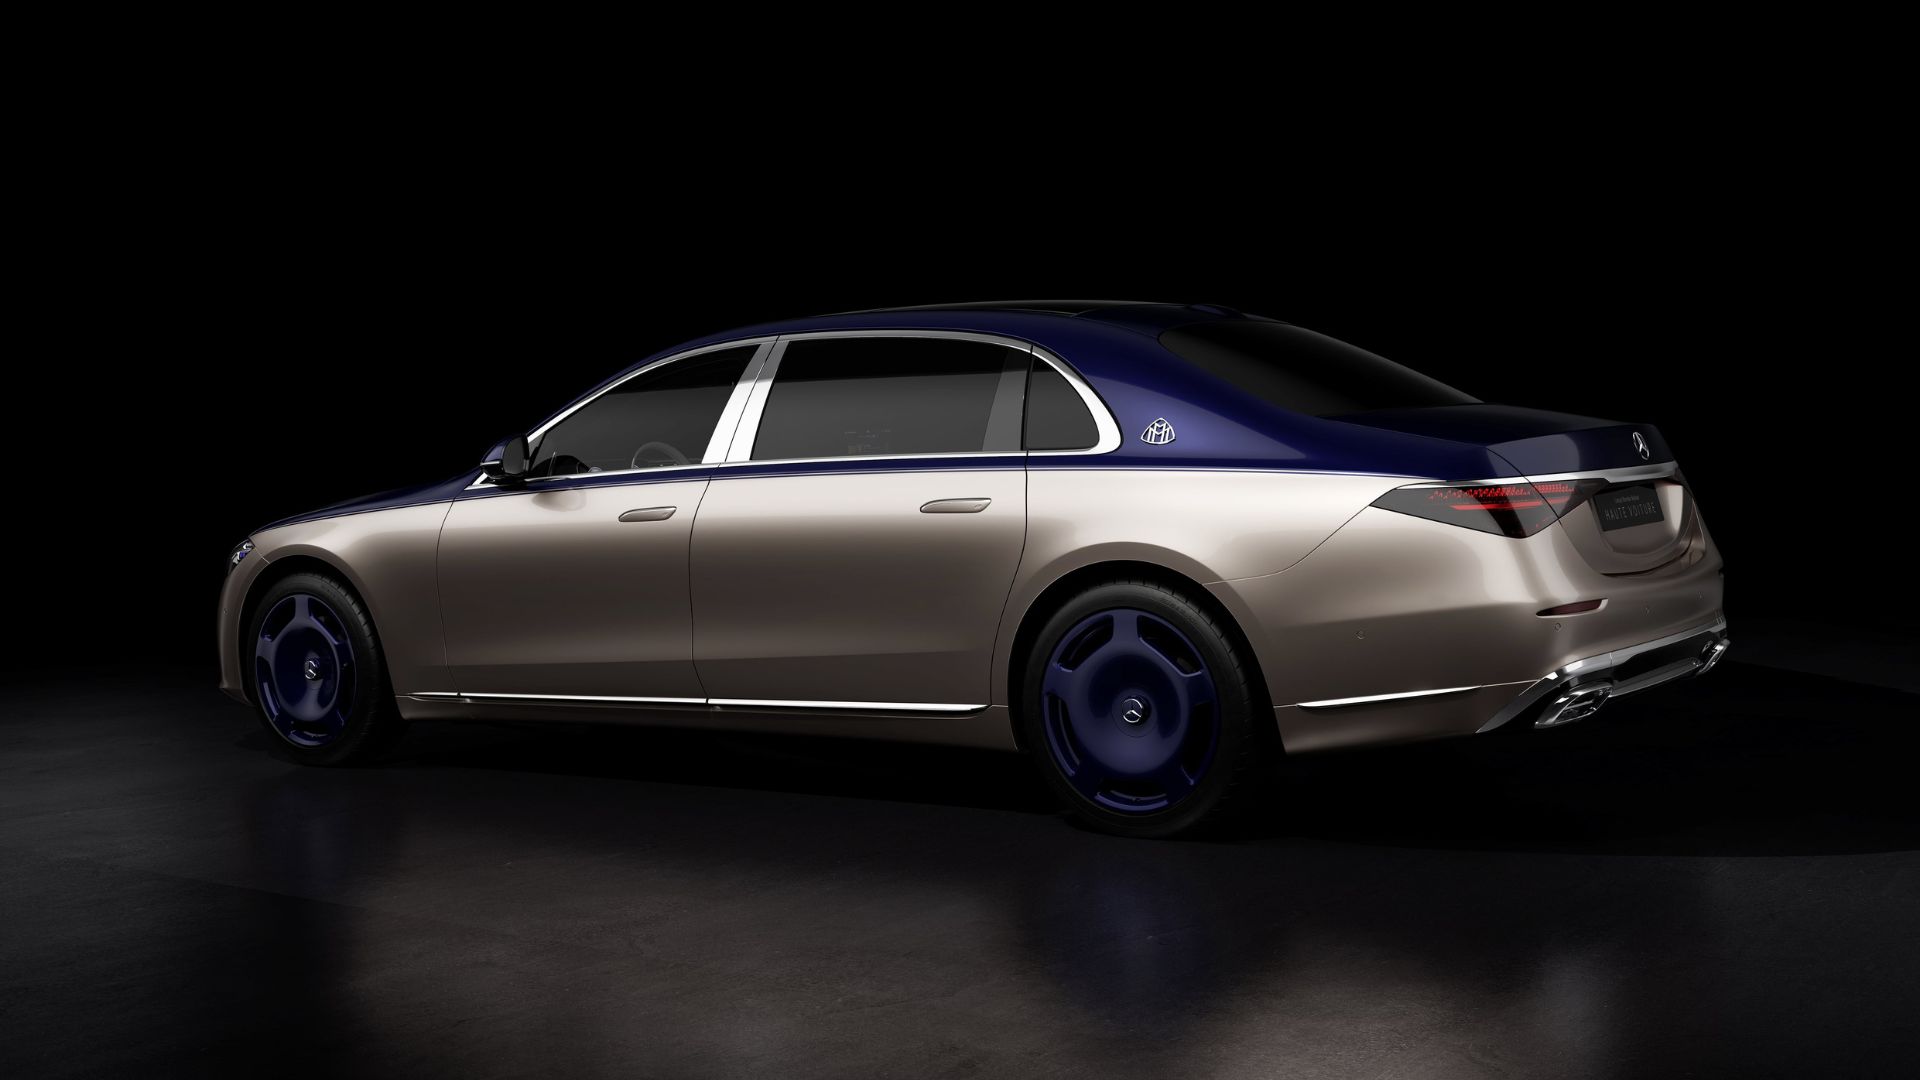 Mercedes-Maybach S-Class Haute Voiture exhibits style like no other ...